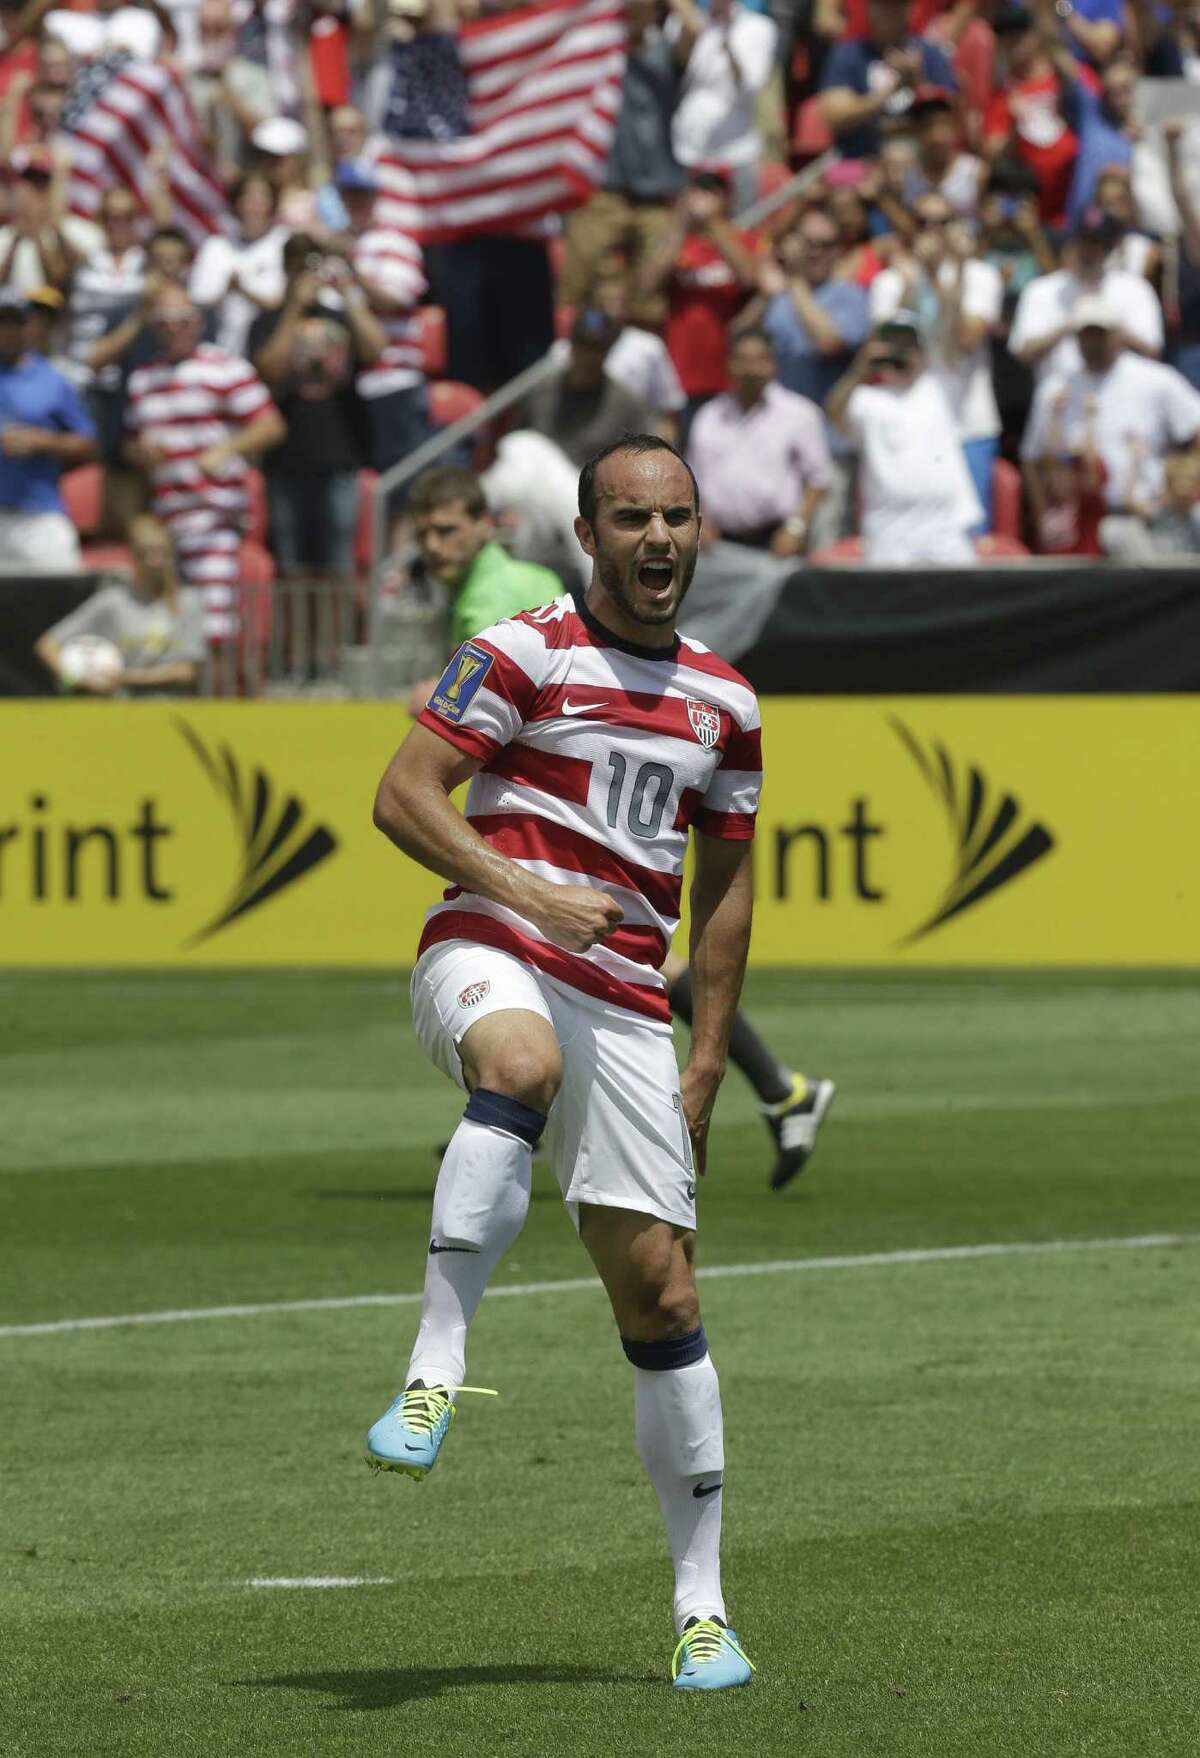 Landon Donovan scored his 53rd international goal in a 4-1 win over Cuba, extending his United States scoring record.